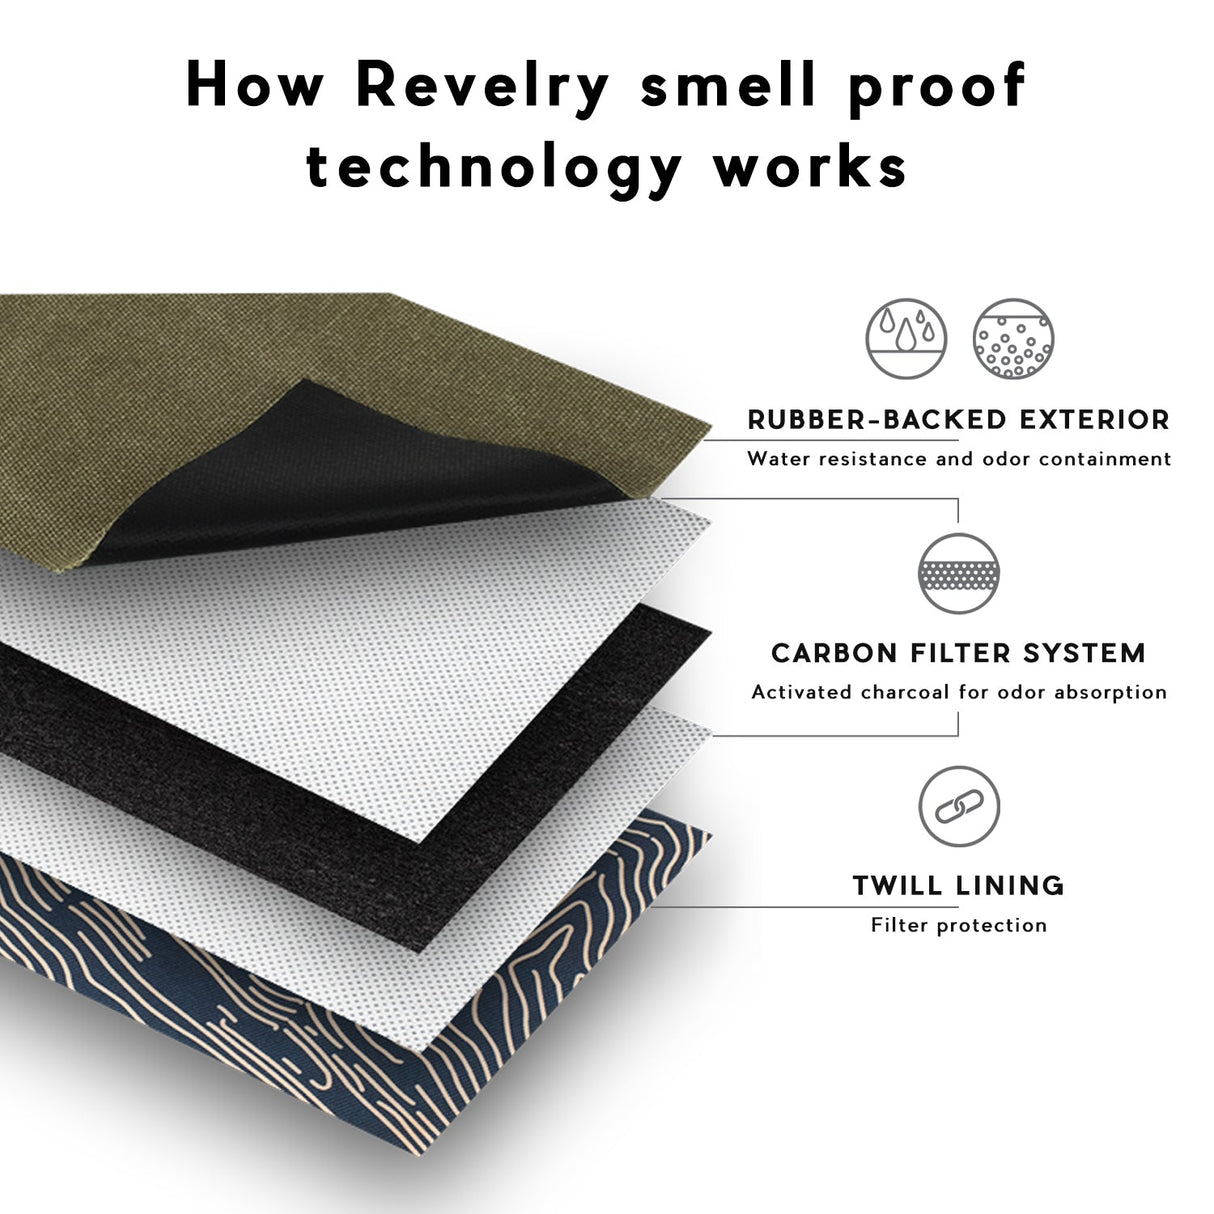 Revelry Supply 'The Gordo' Smell Proof Pouch materials close-up with labels